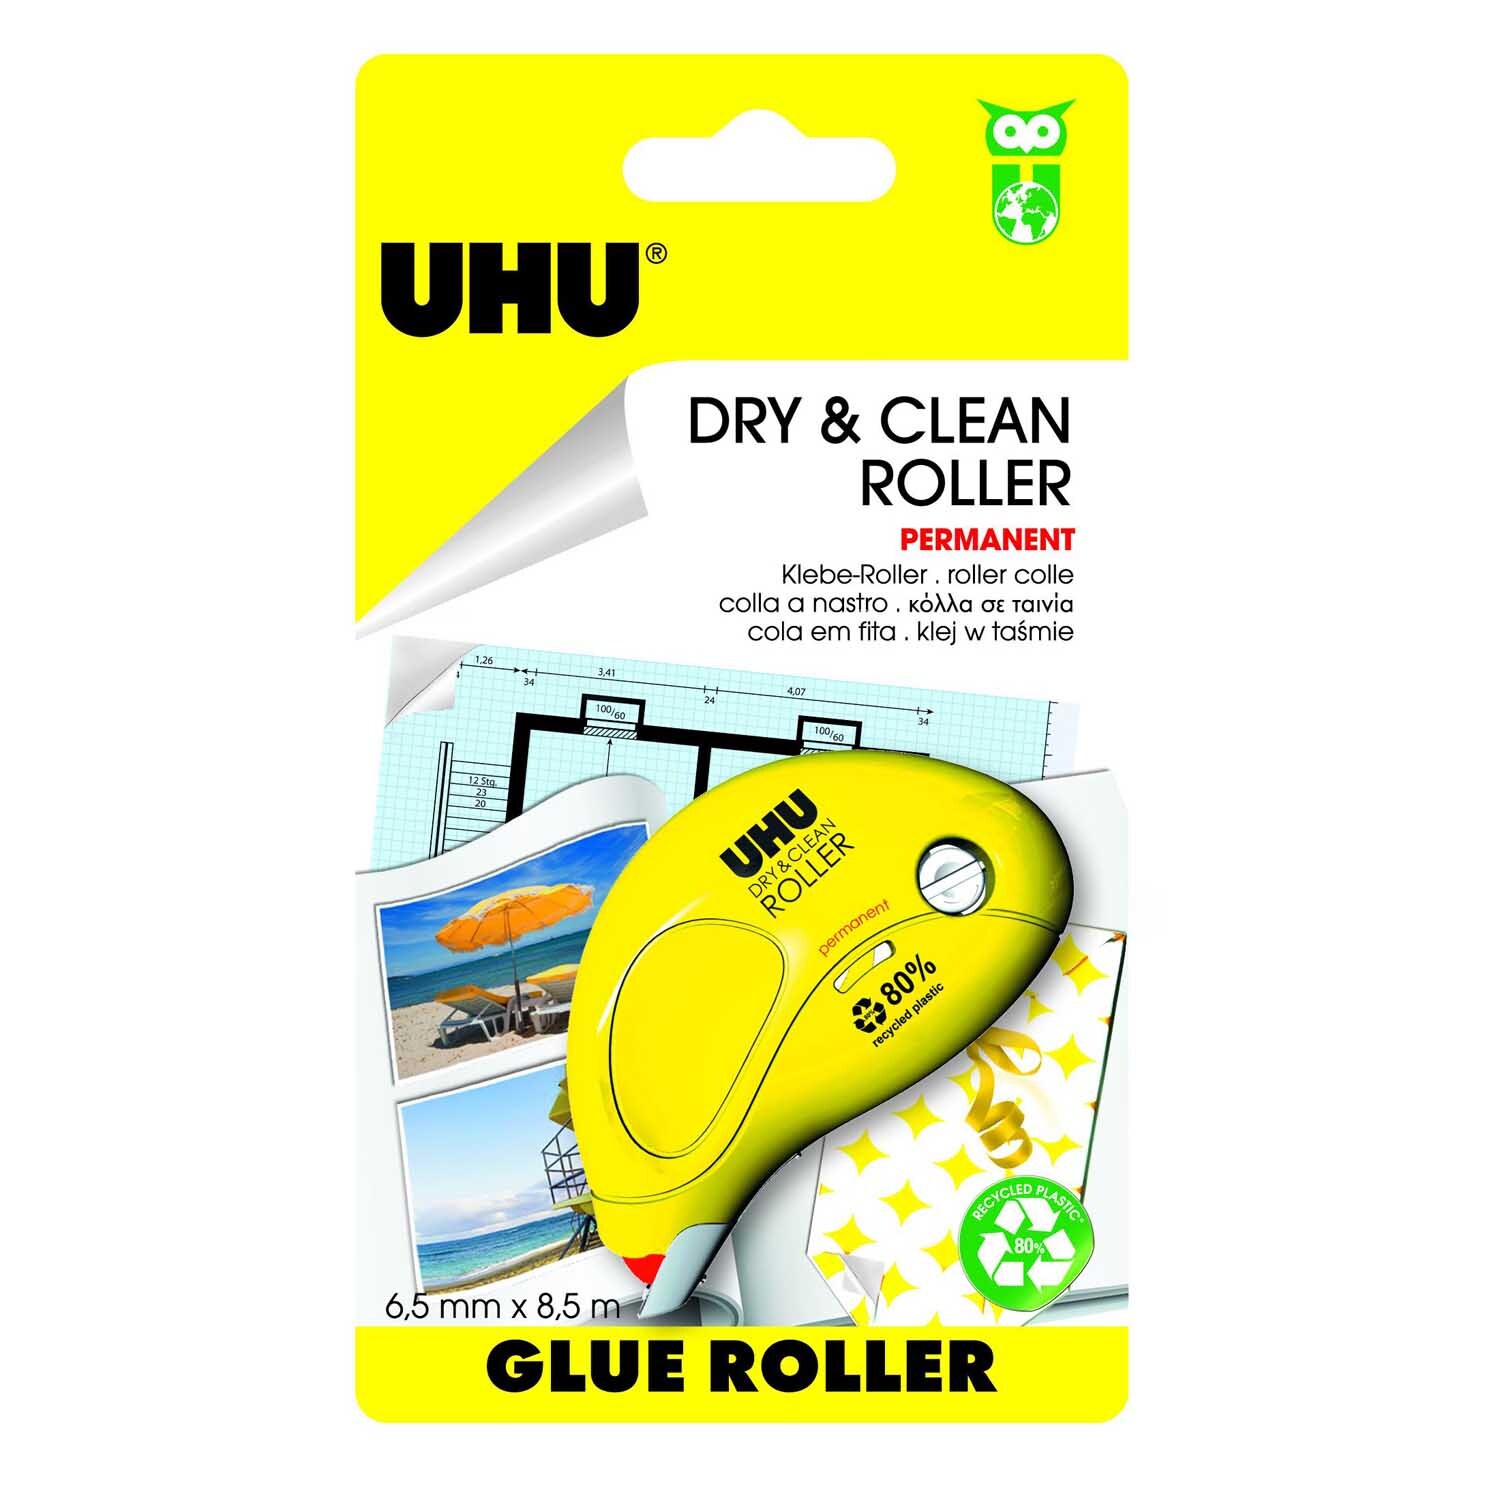 Dry & Clean Roller permanent 6,5mm